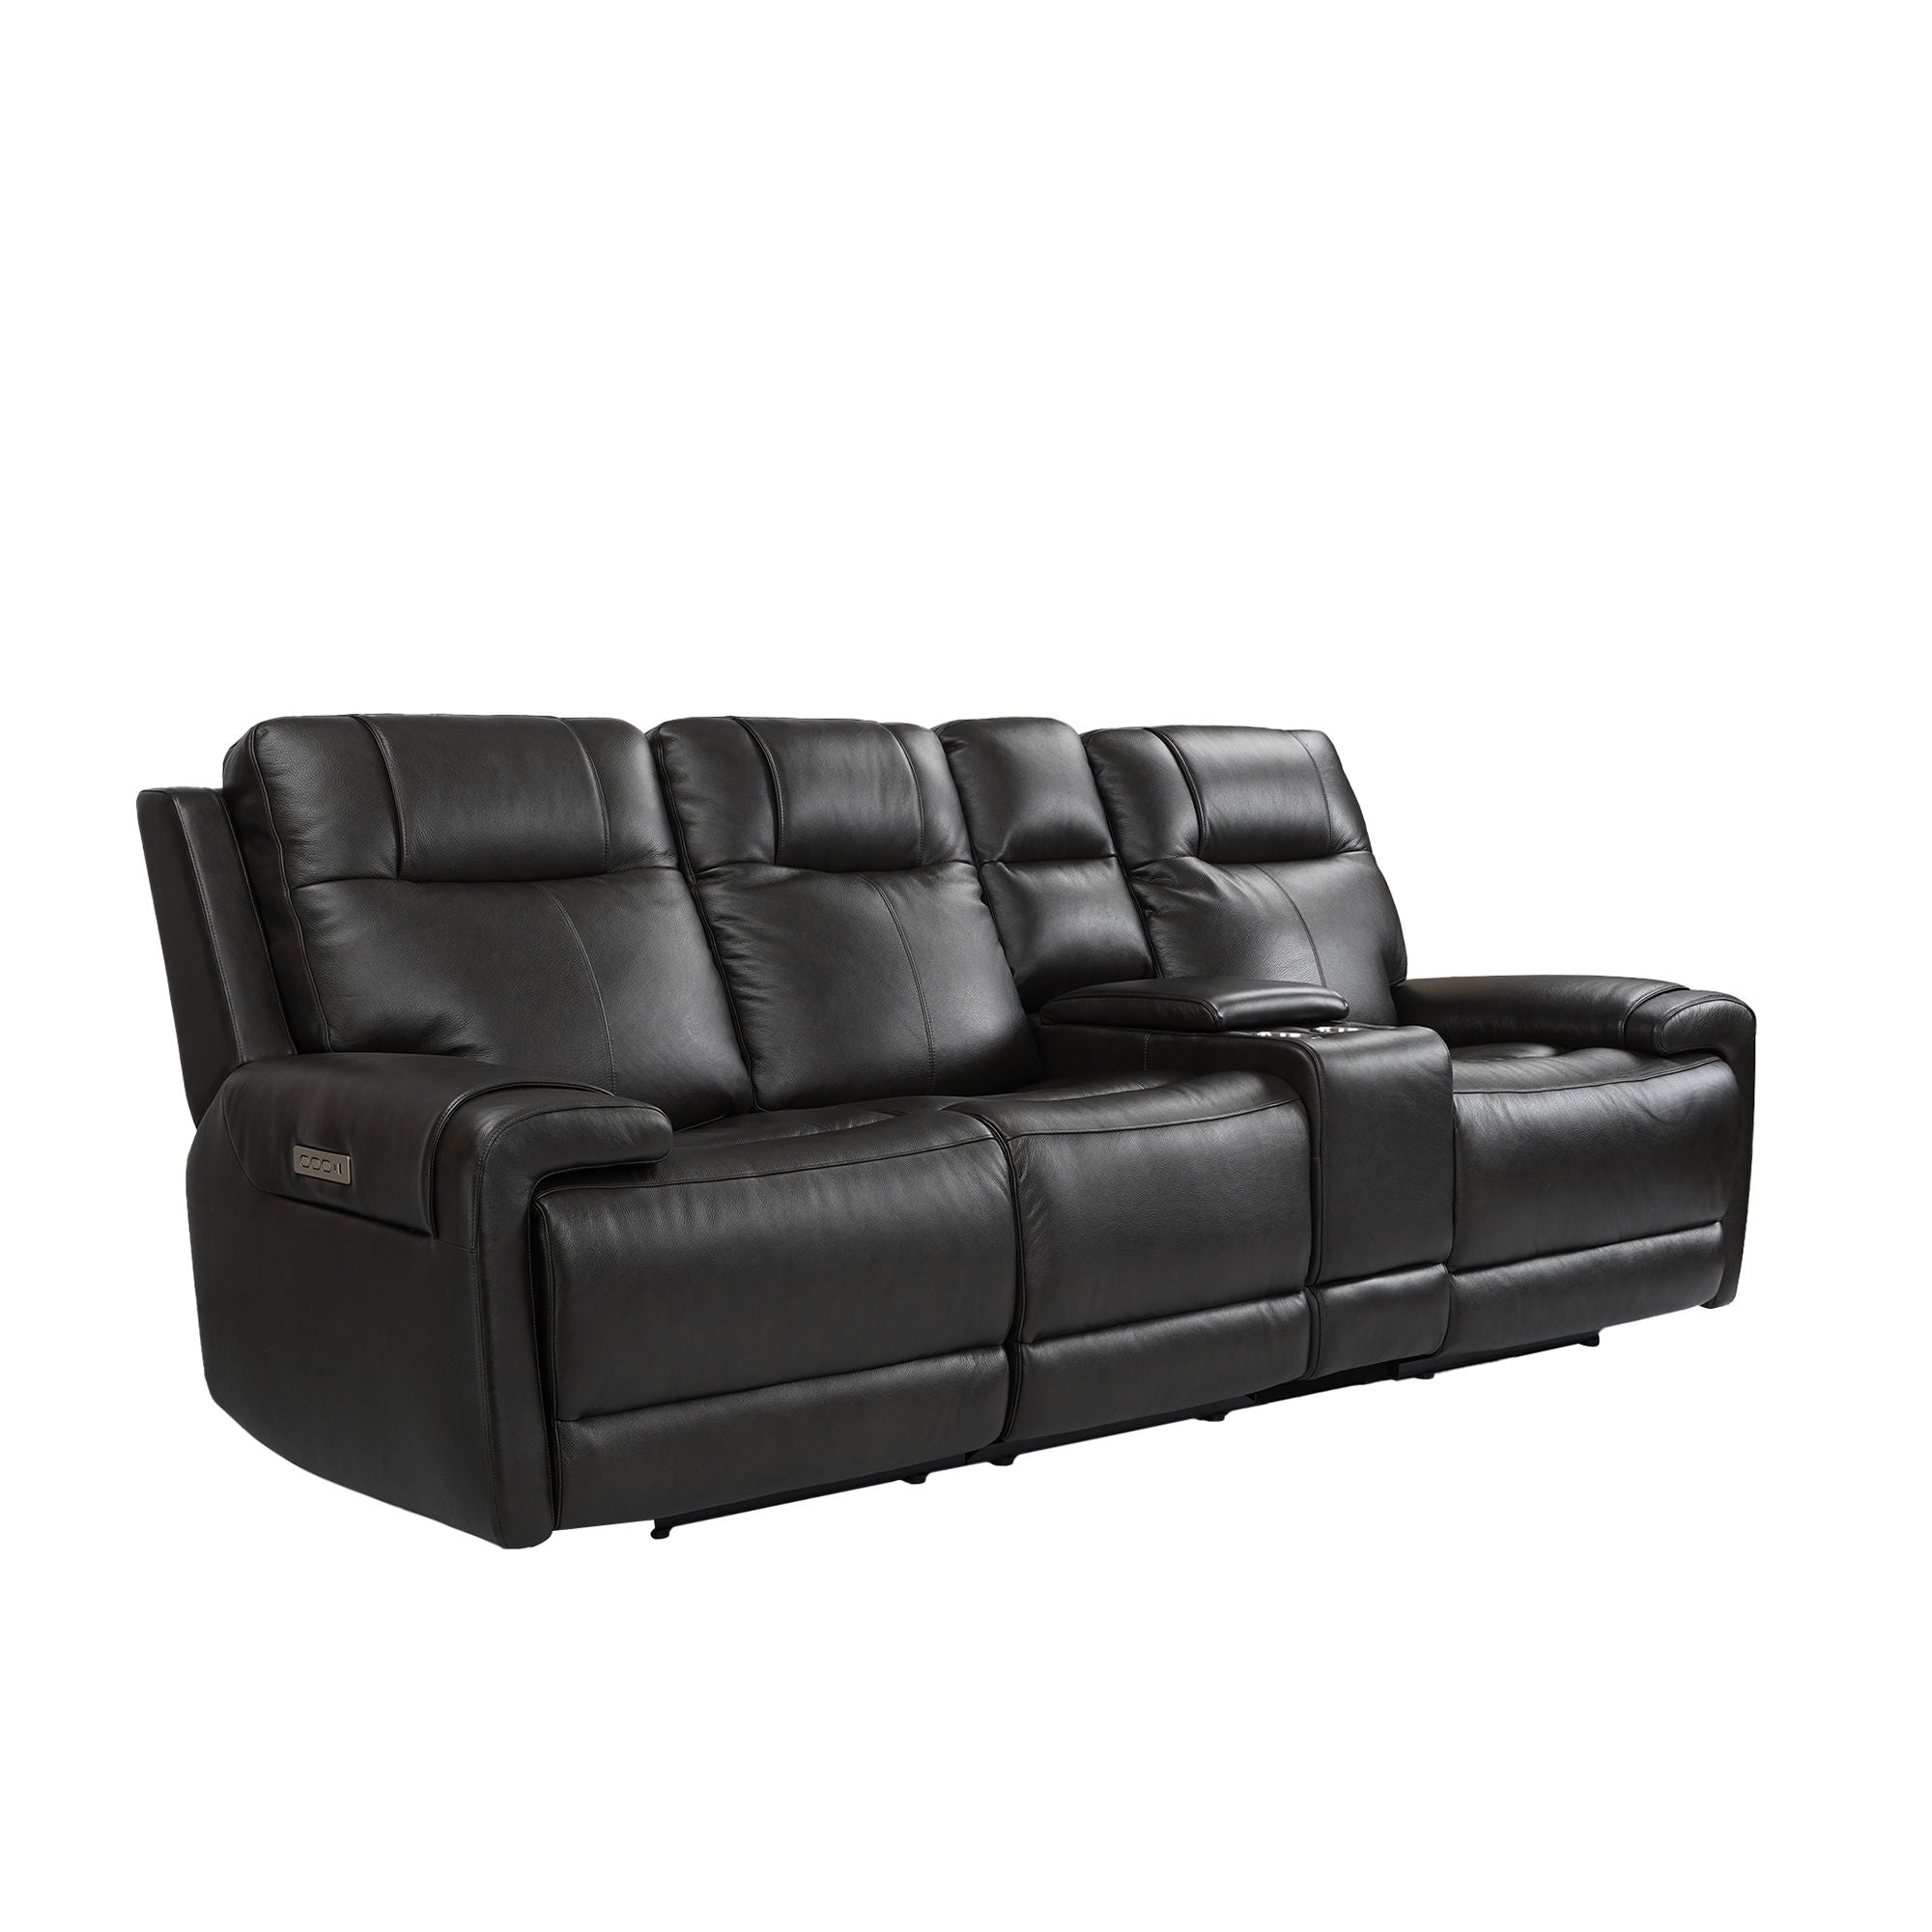 Trevor Triple Power Sofa With Console, Genuine Leather, Lumbar Support, Adjustable Headrest, USB & Type C Charge Port, Middle Armless Chair With Triple Power